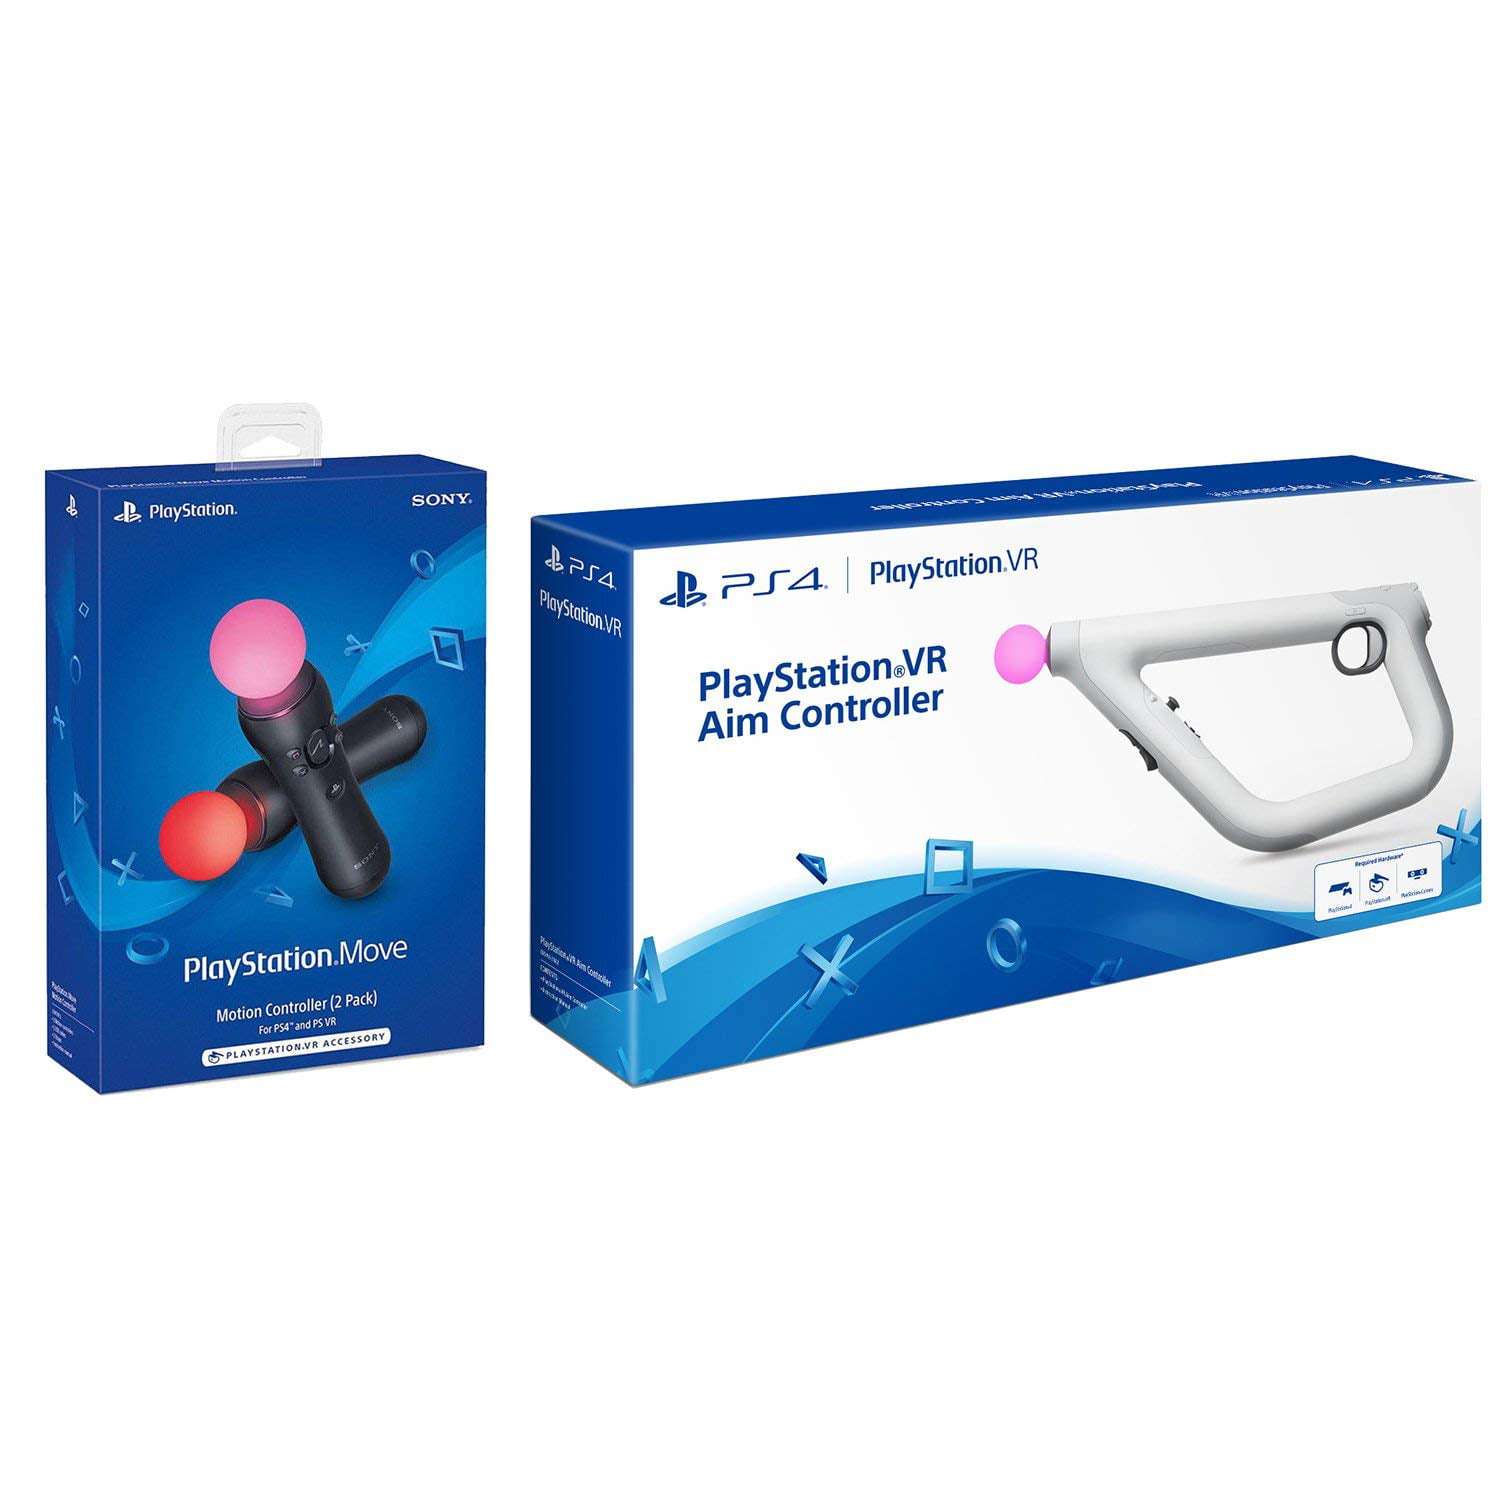 Sony PlayStation VR PSVR Aim and 2 Pack Move Motion Controllers - Walmart.com